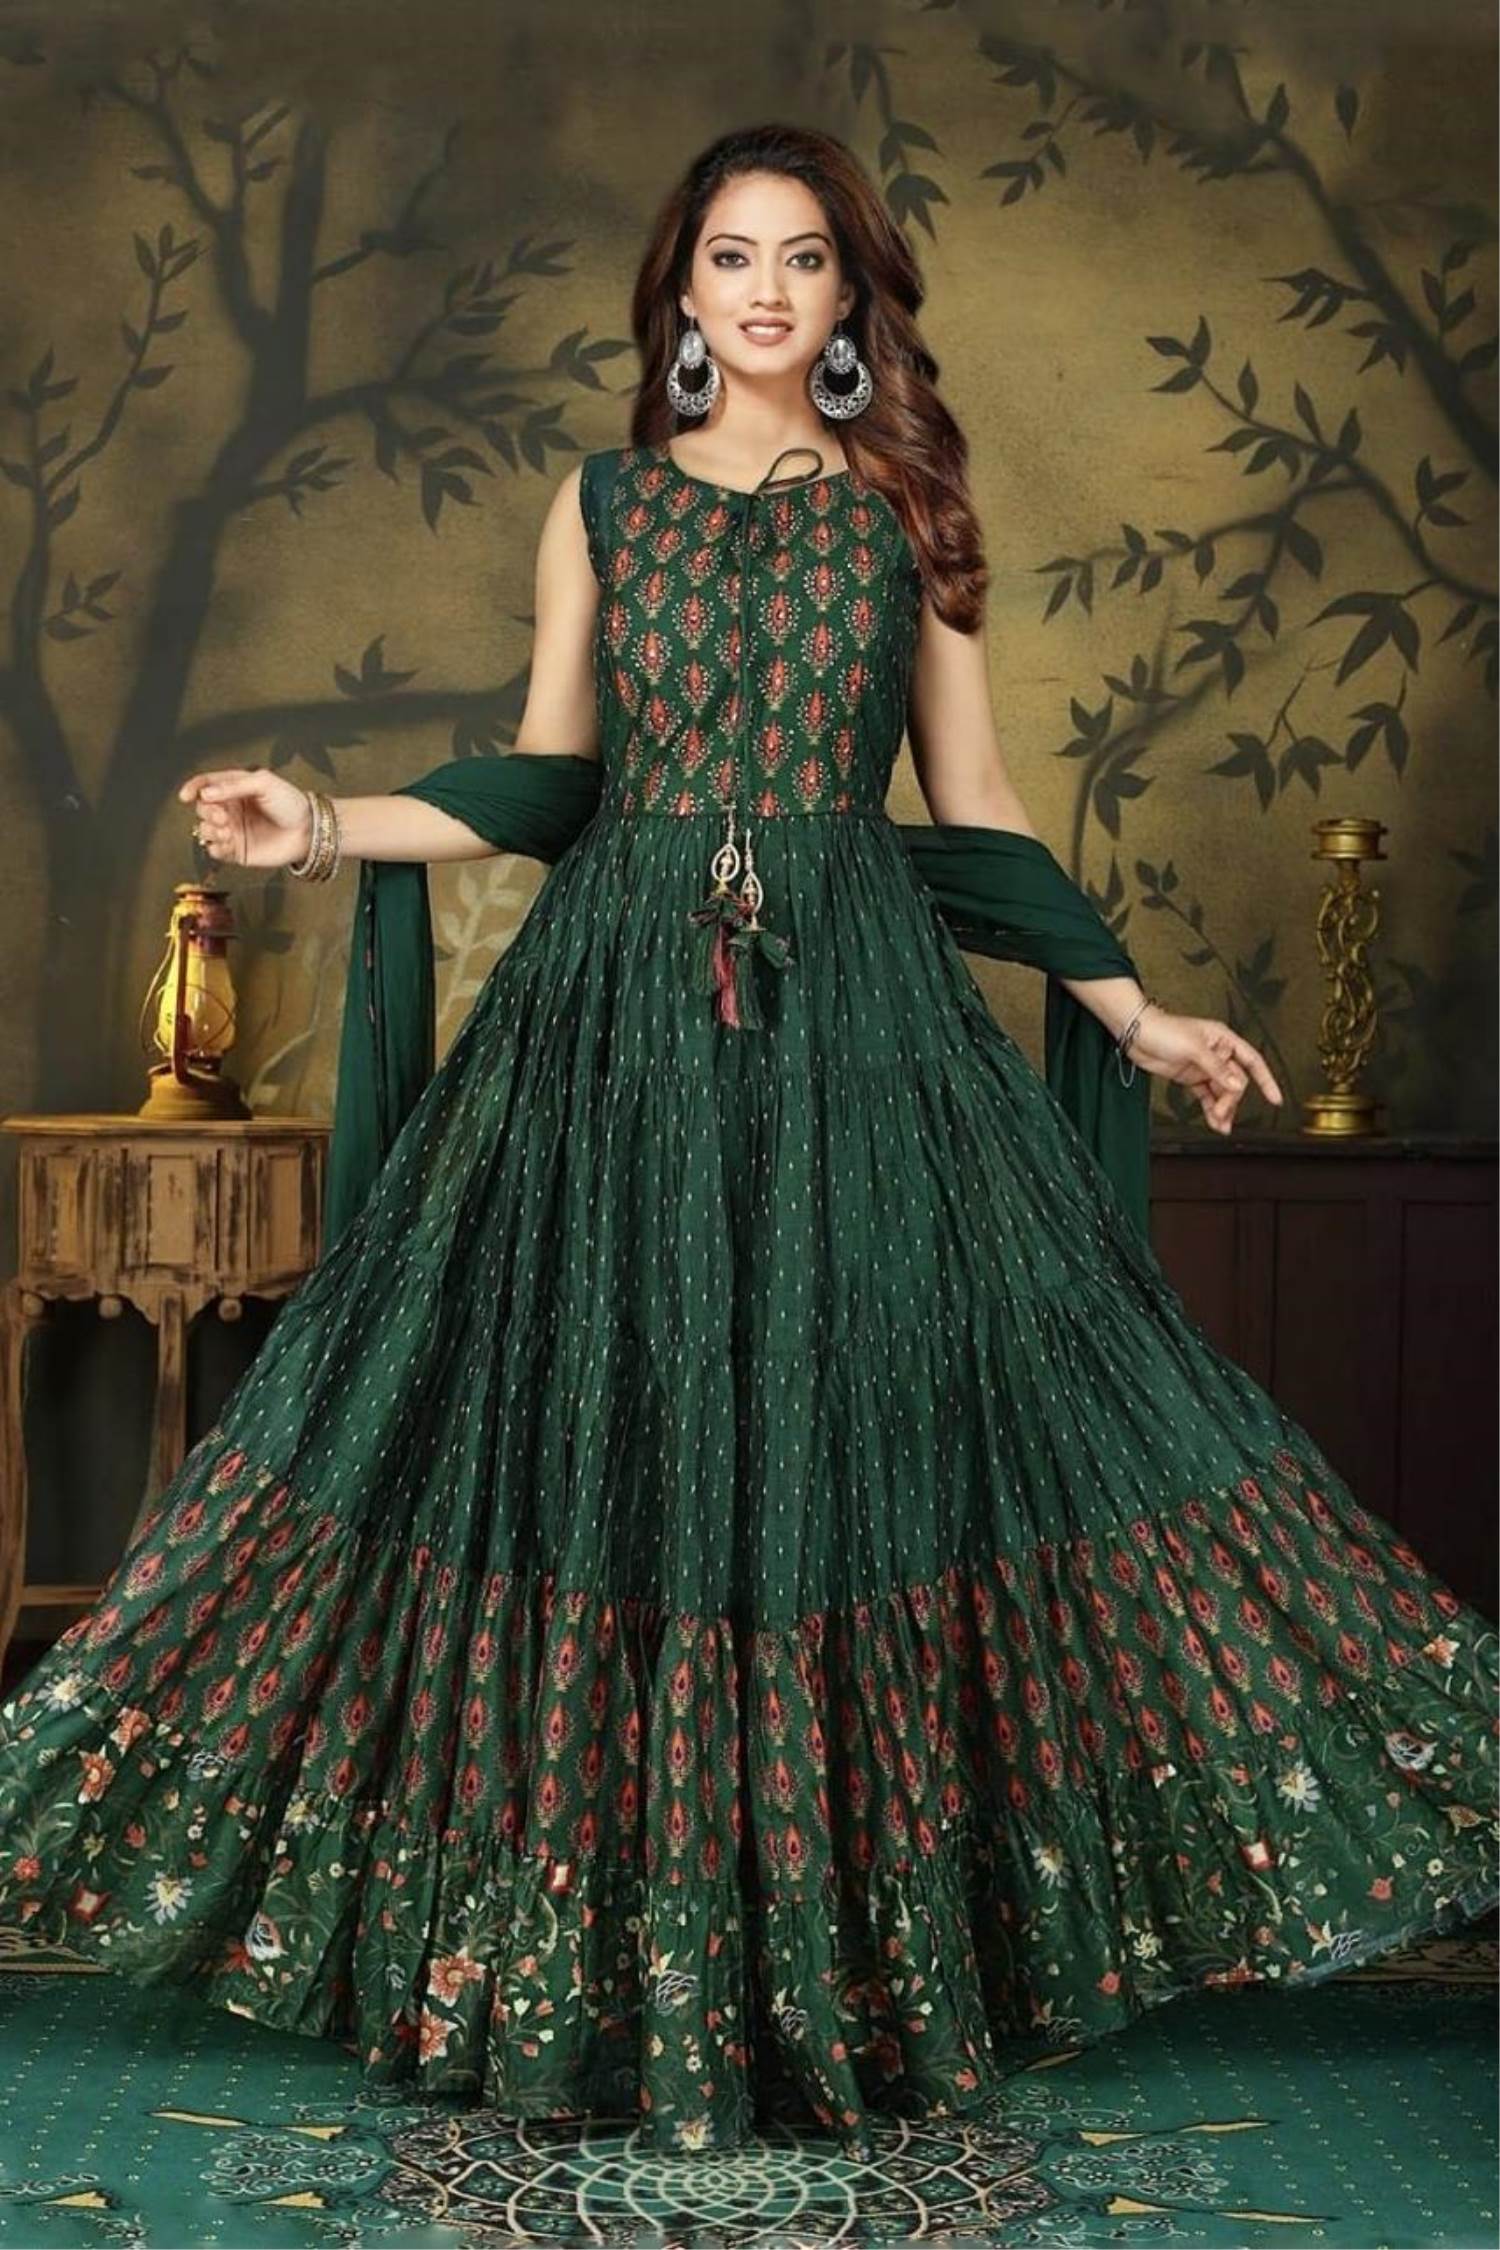 Green Color Party Wear Designer Gown With Dupatta :: MY SHOPPY LADIES WEAR